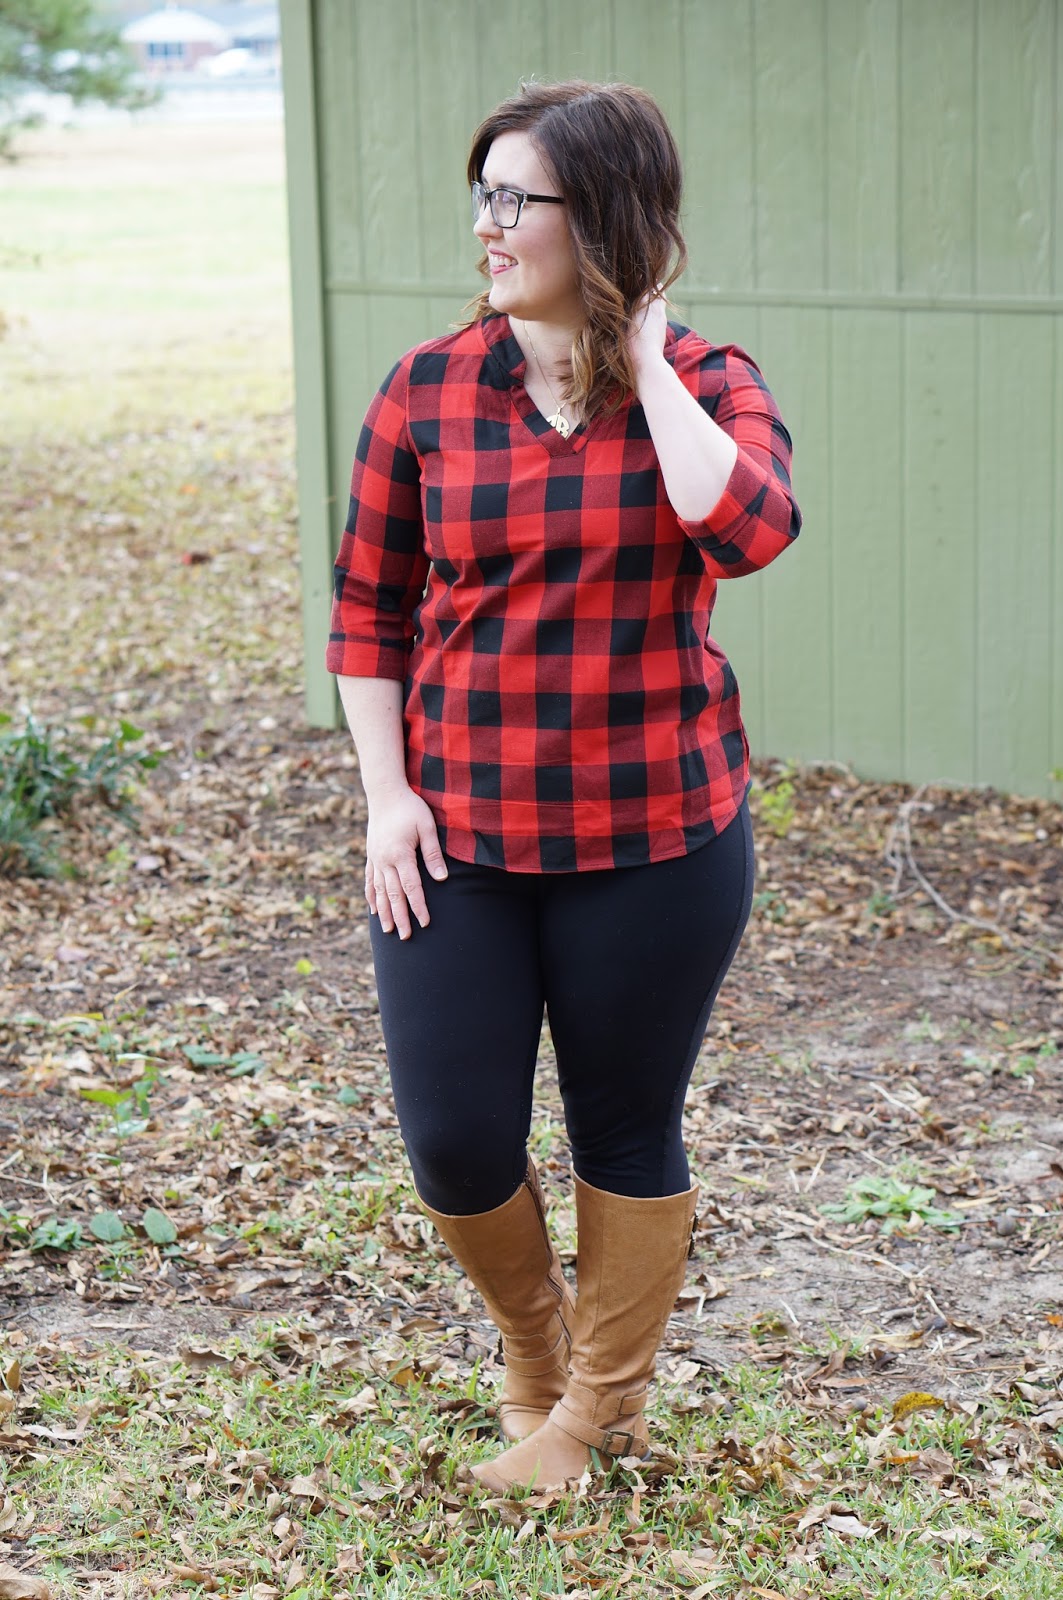 Rebecca Lately Dress Lily Buffalo Plaid Top Cory Vines Leggings Bare Traps Boots ONecklace Necklace